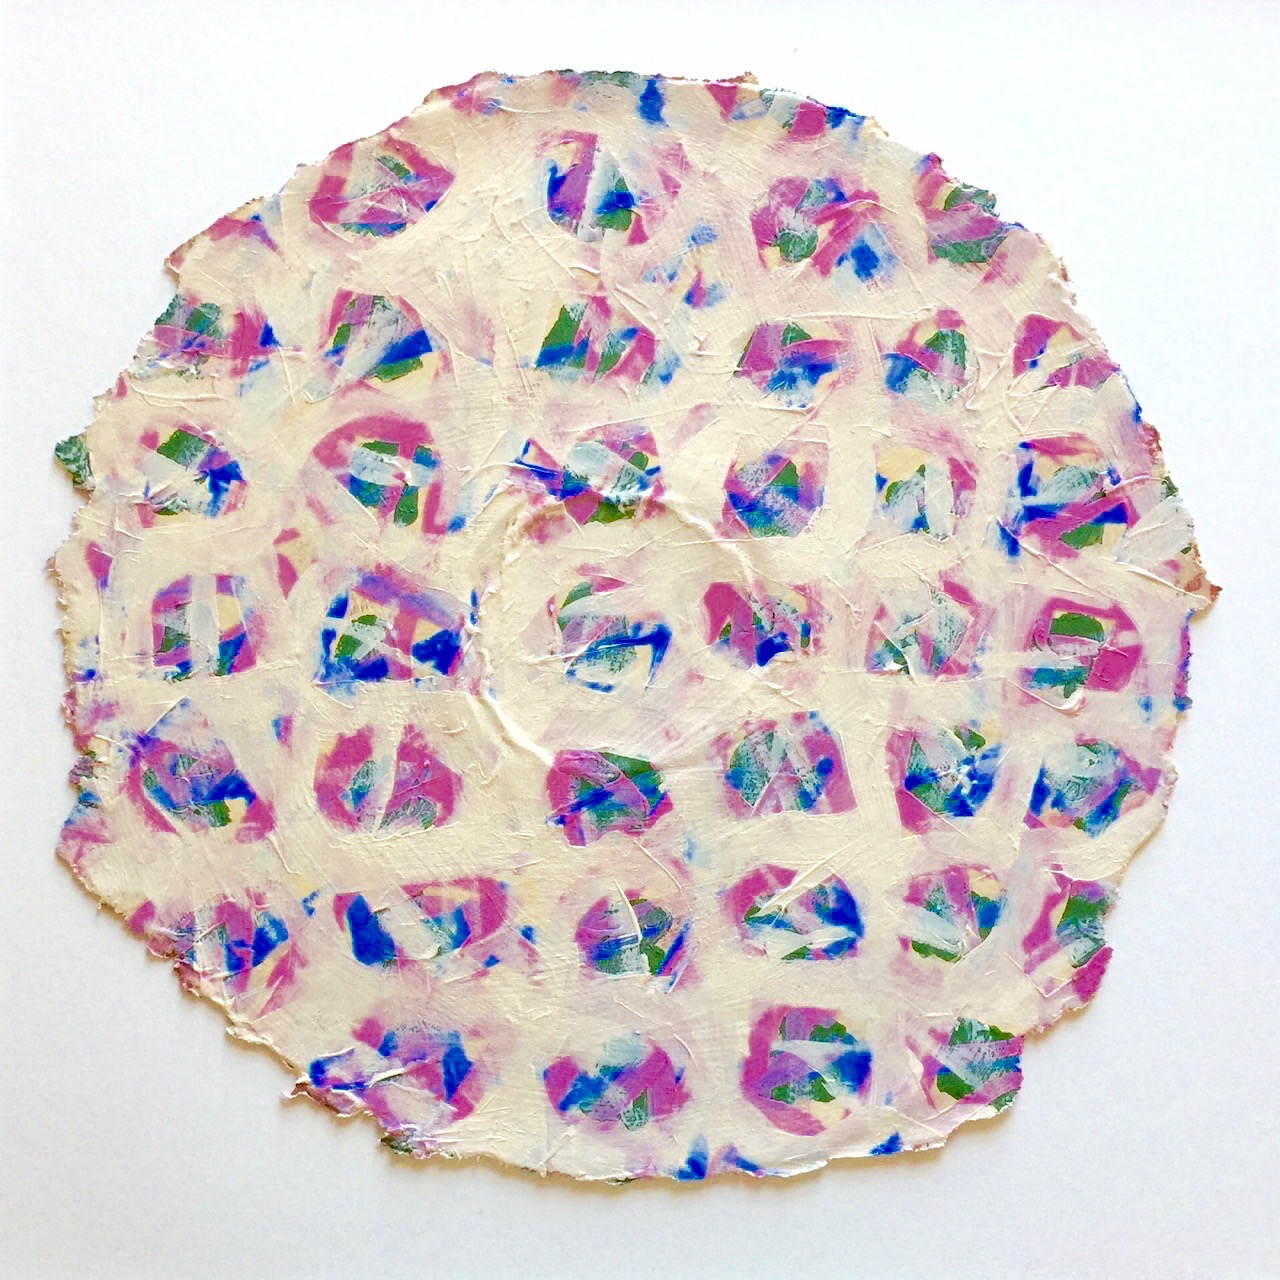 A Painting Day: Plate Series - Cake Plate - Ruth Andre